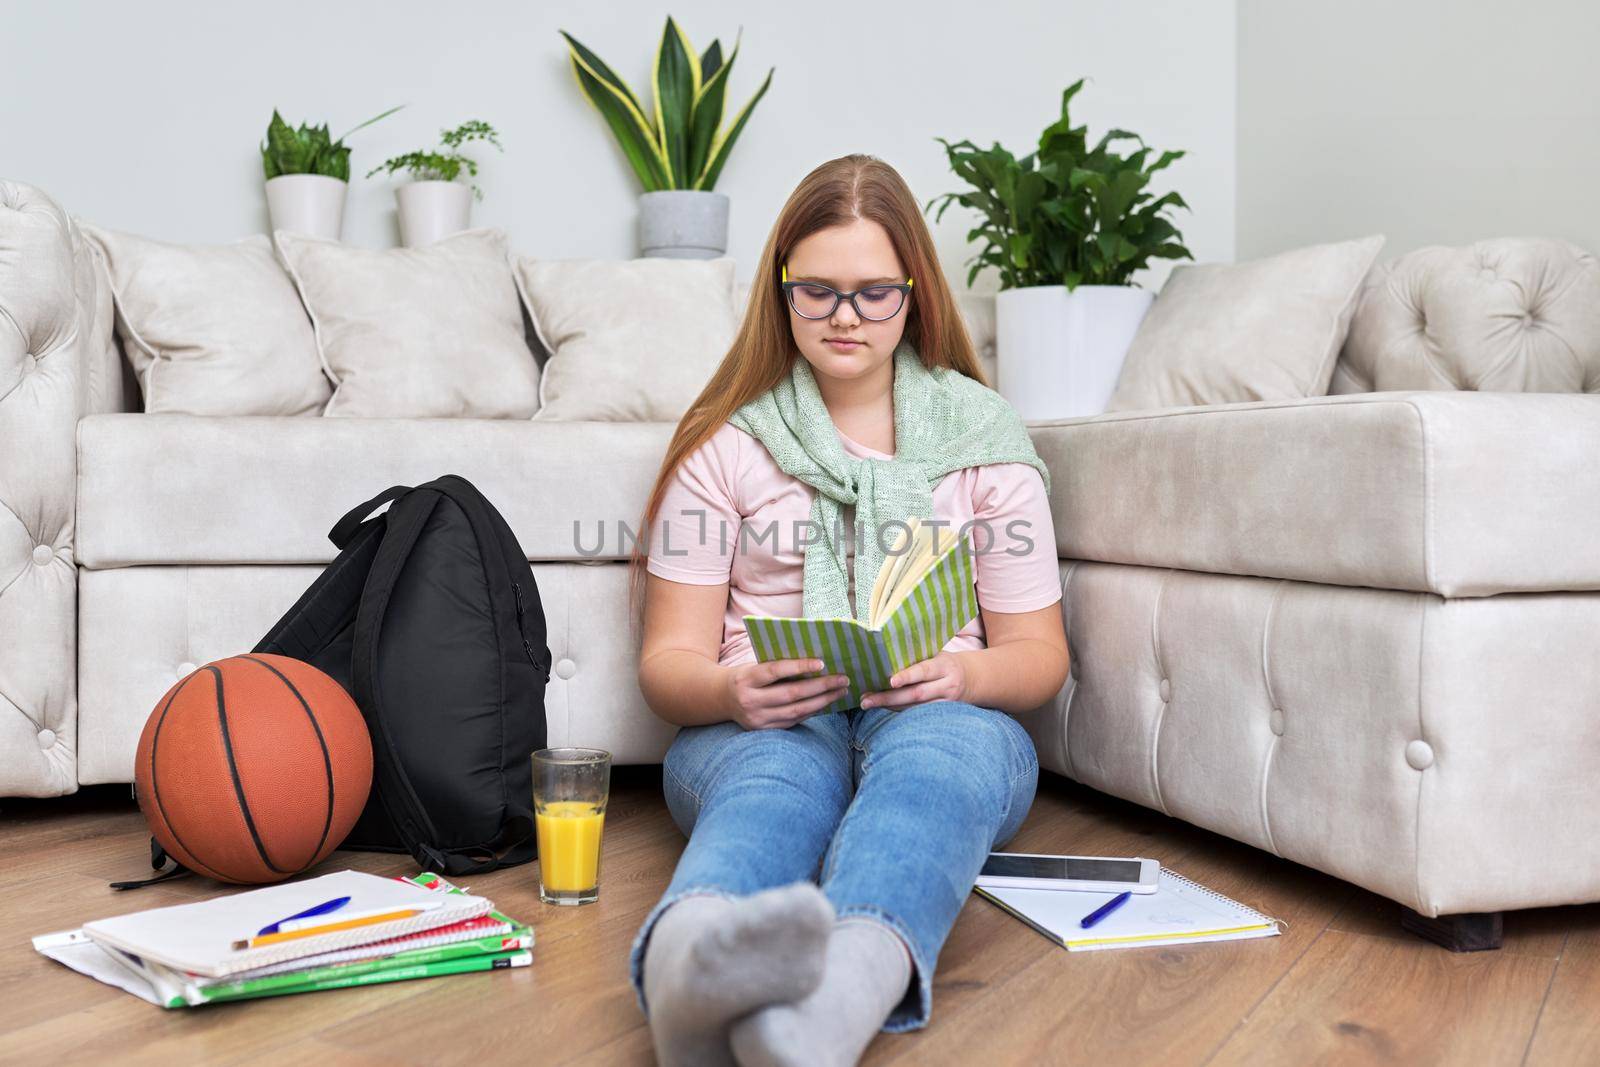 Lifestyle, education children 12, 13 years old concept. Teenage girl sitting at home on the living room floor reading book with backpack, books, school notebooks, basketball